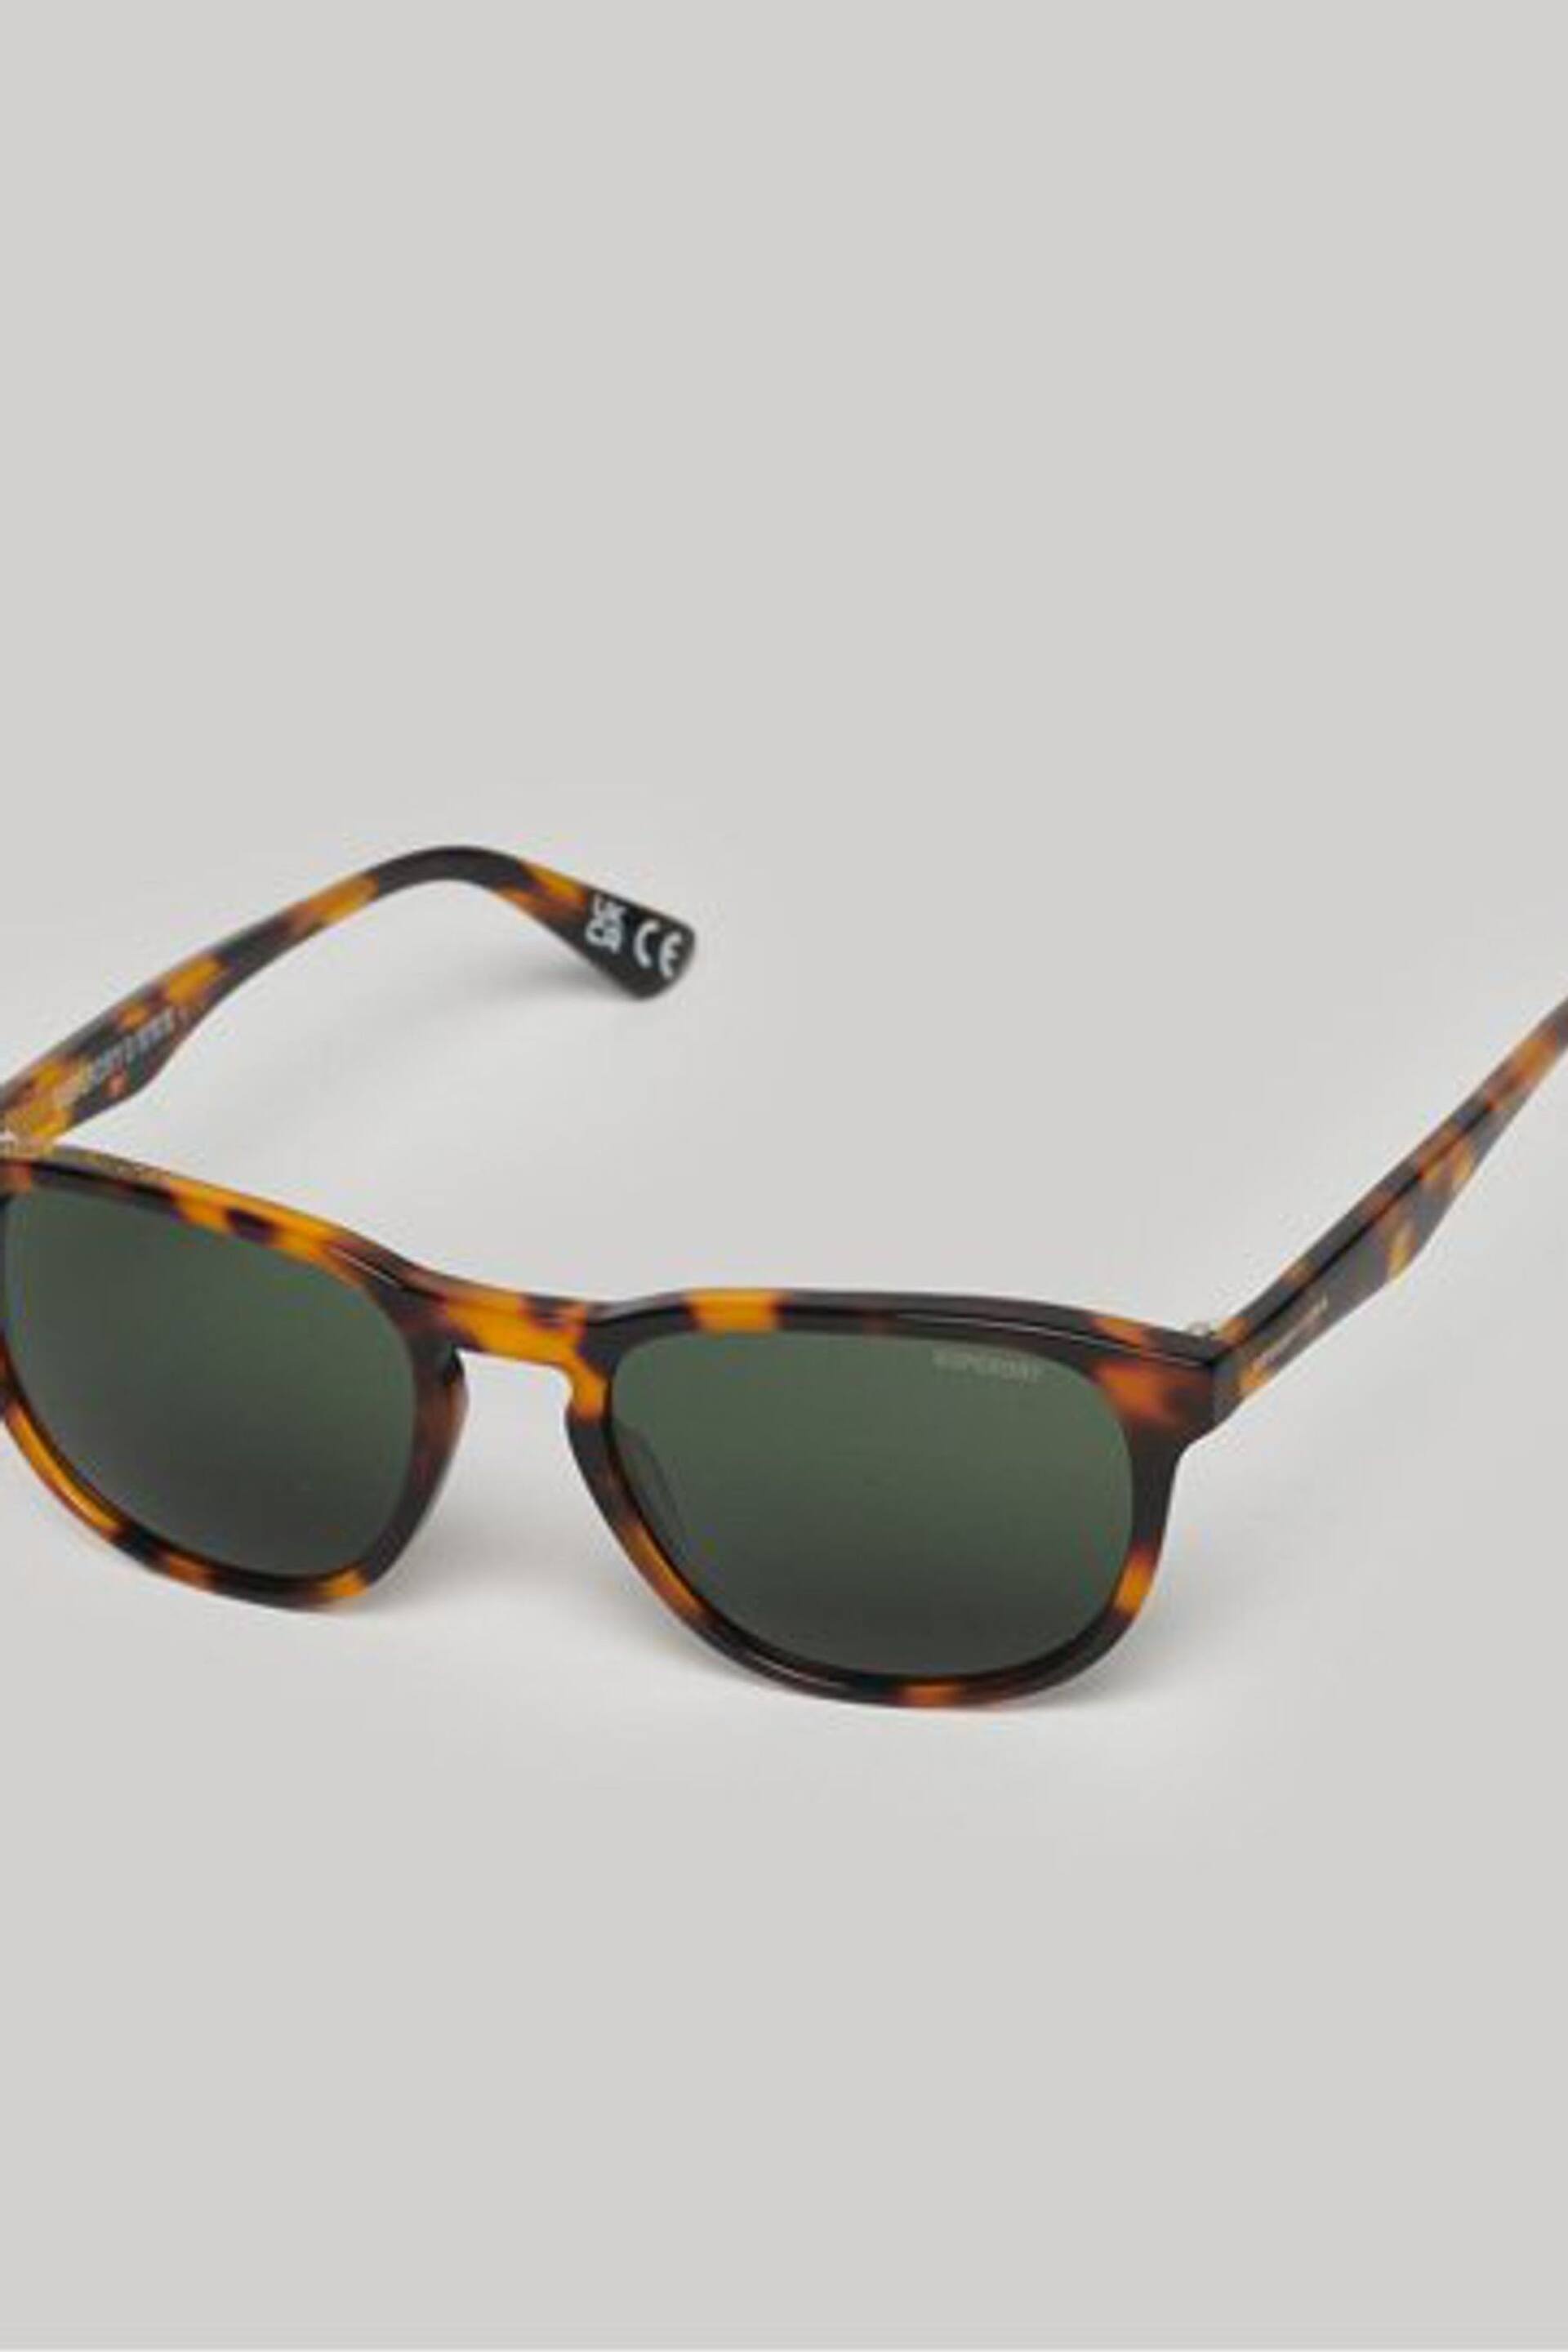 Superdry Brown SDR Camberwell Sunglasses - Image 3 of 6